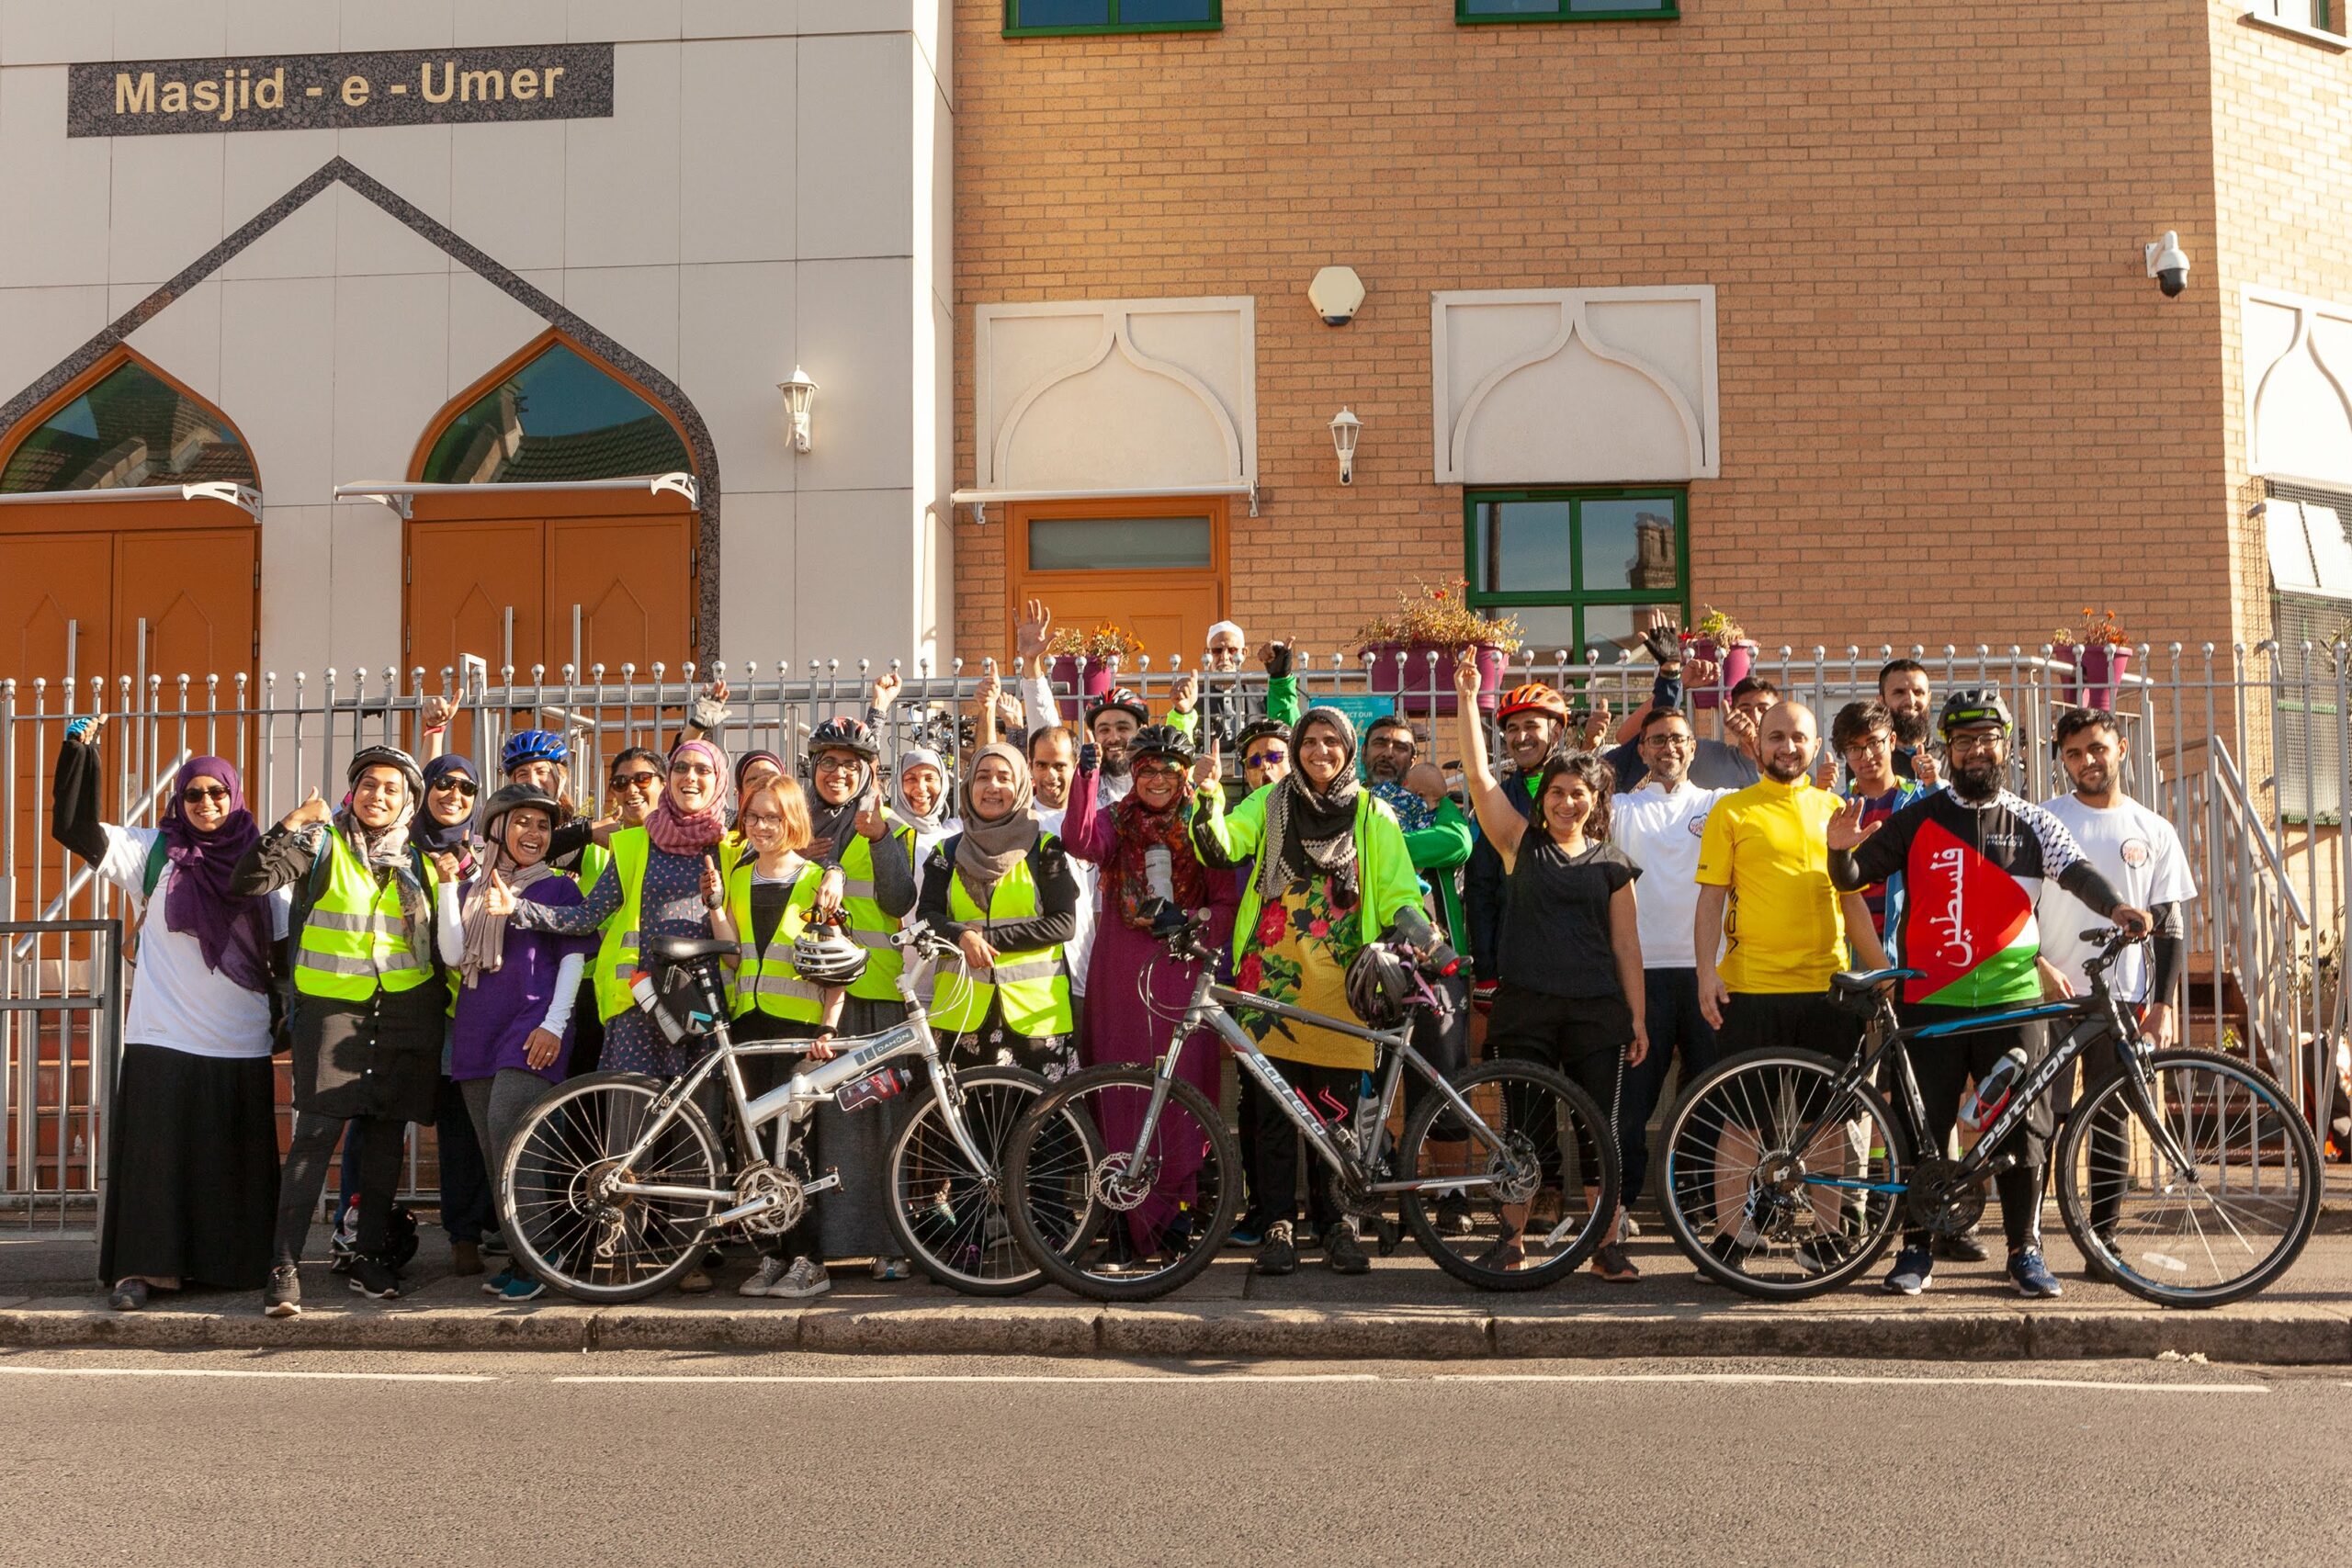 A group of people with bicycles standing outside a Mosque waving